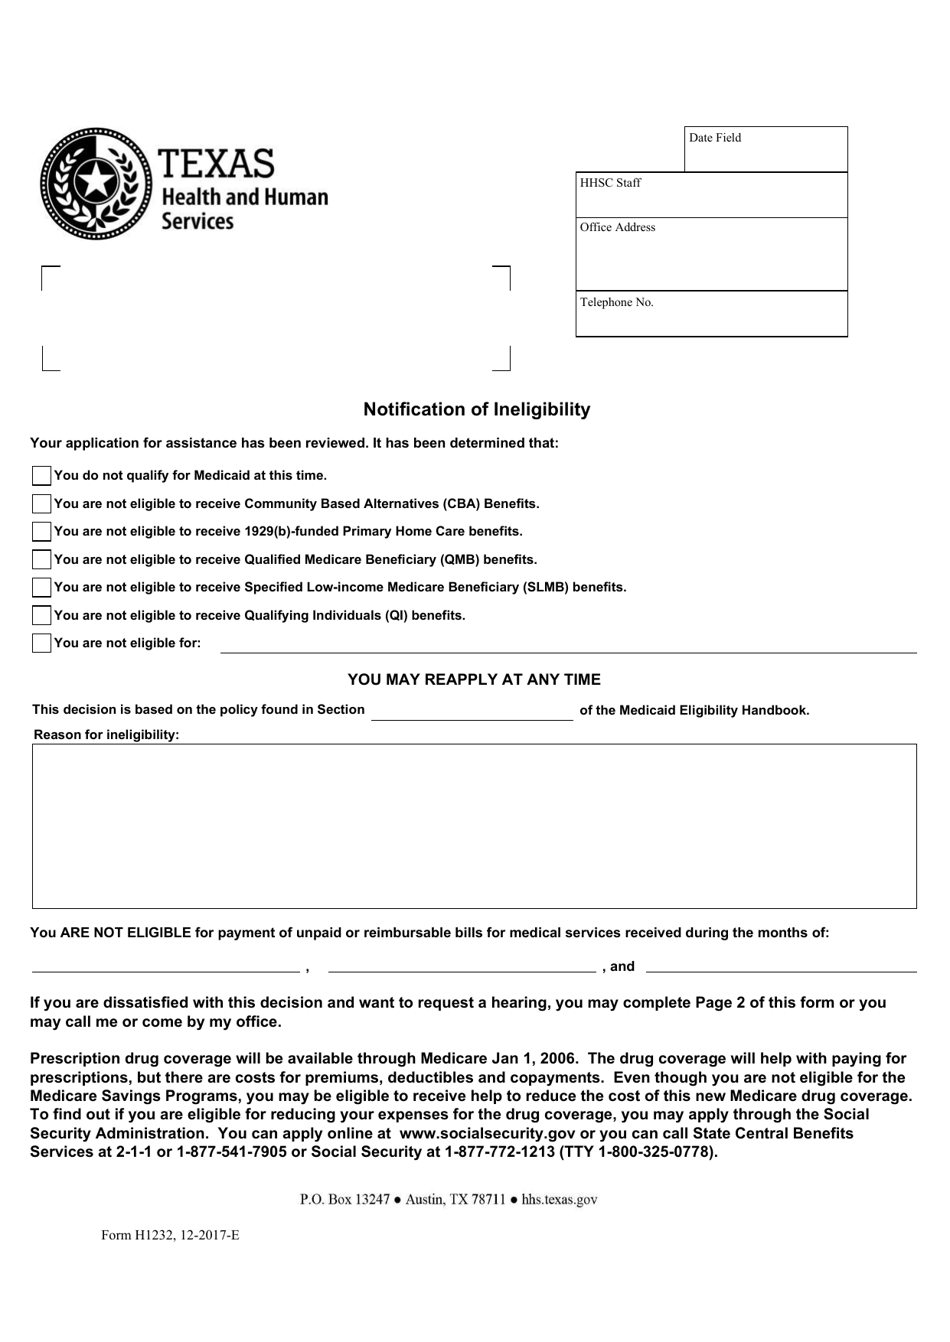 Form H1232 Notification of Ineligibility - Texas, Page 1